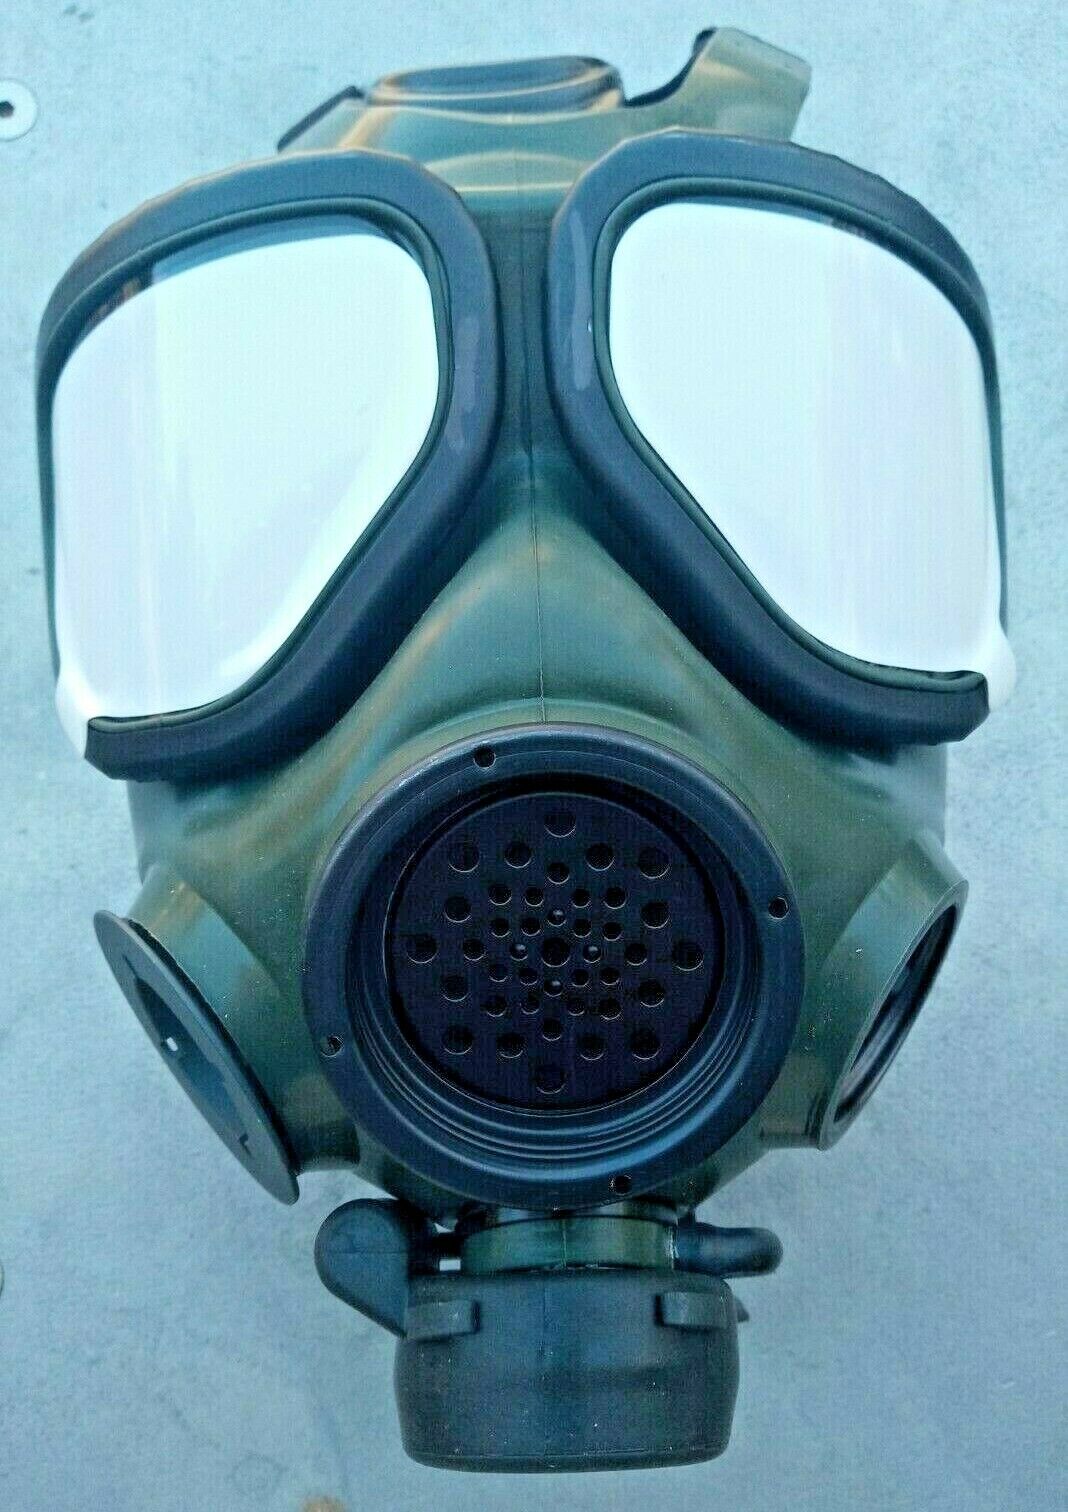 FR-M40 Military Issue Gas Mask/Respirator 40MM NATO New Sealed Size SMALL